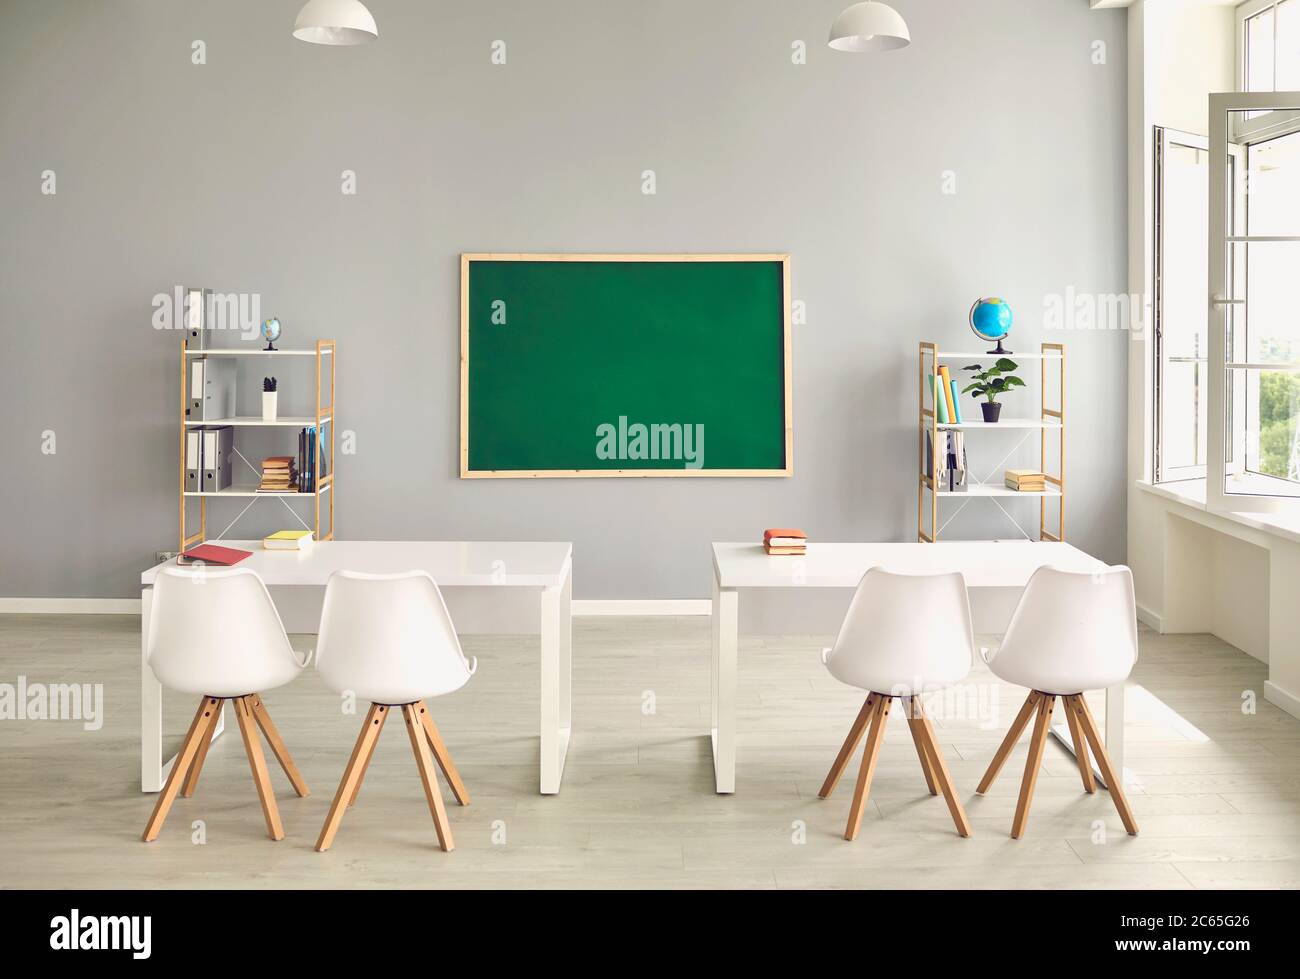 Empty school classroom interior with desks and chairs, space for text on chalkboard. Modern schoolroom with furniture Stock Photo